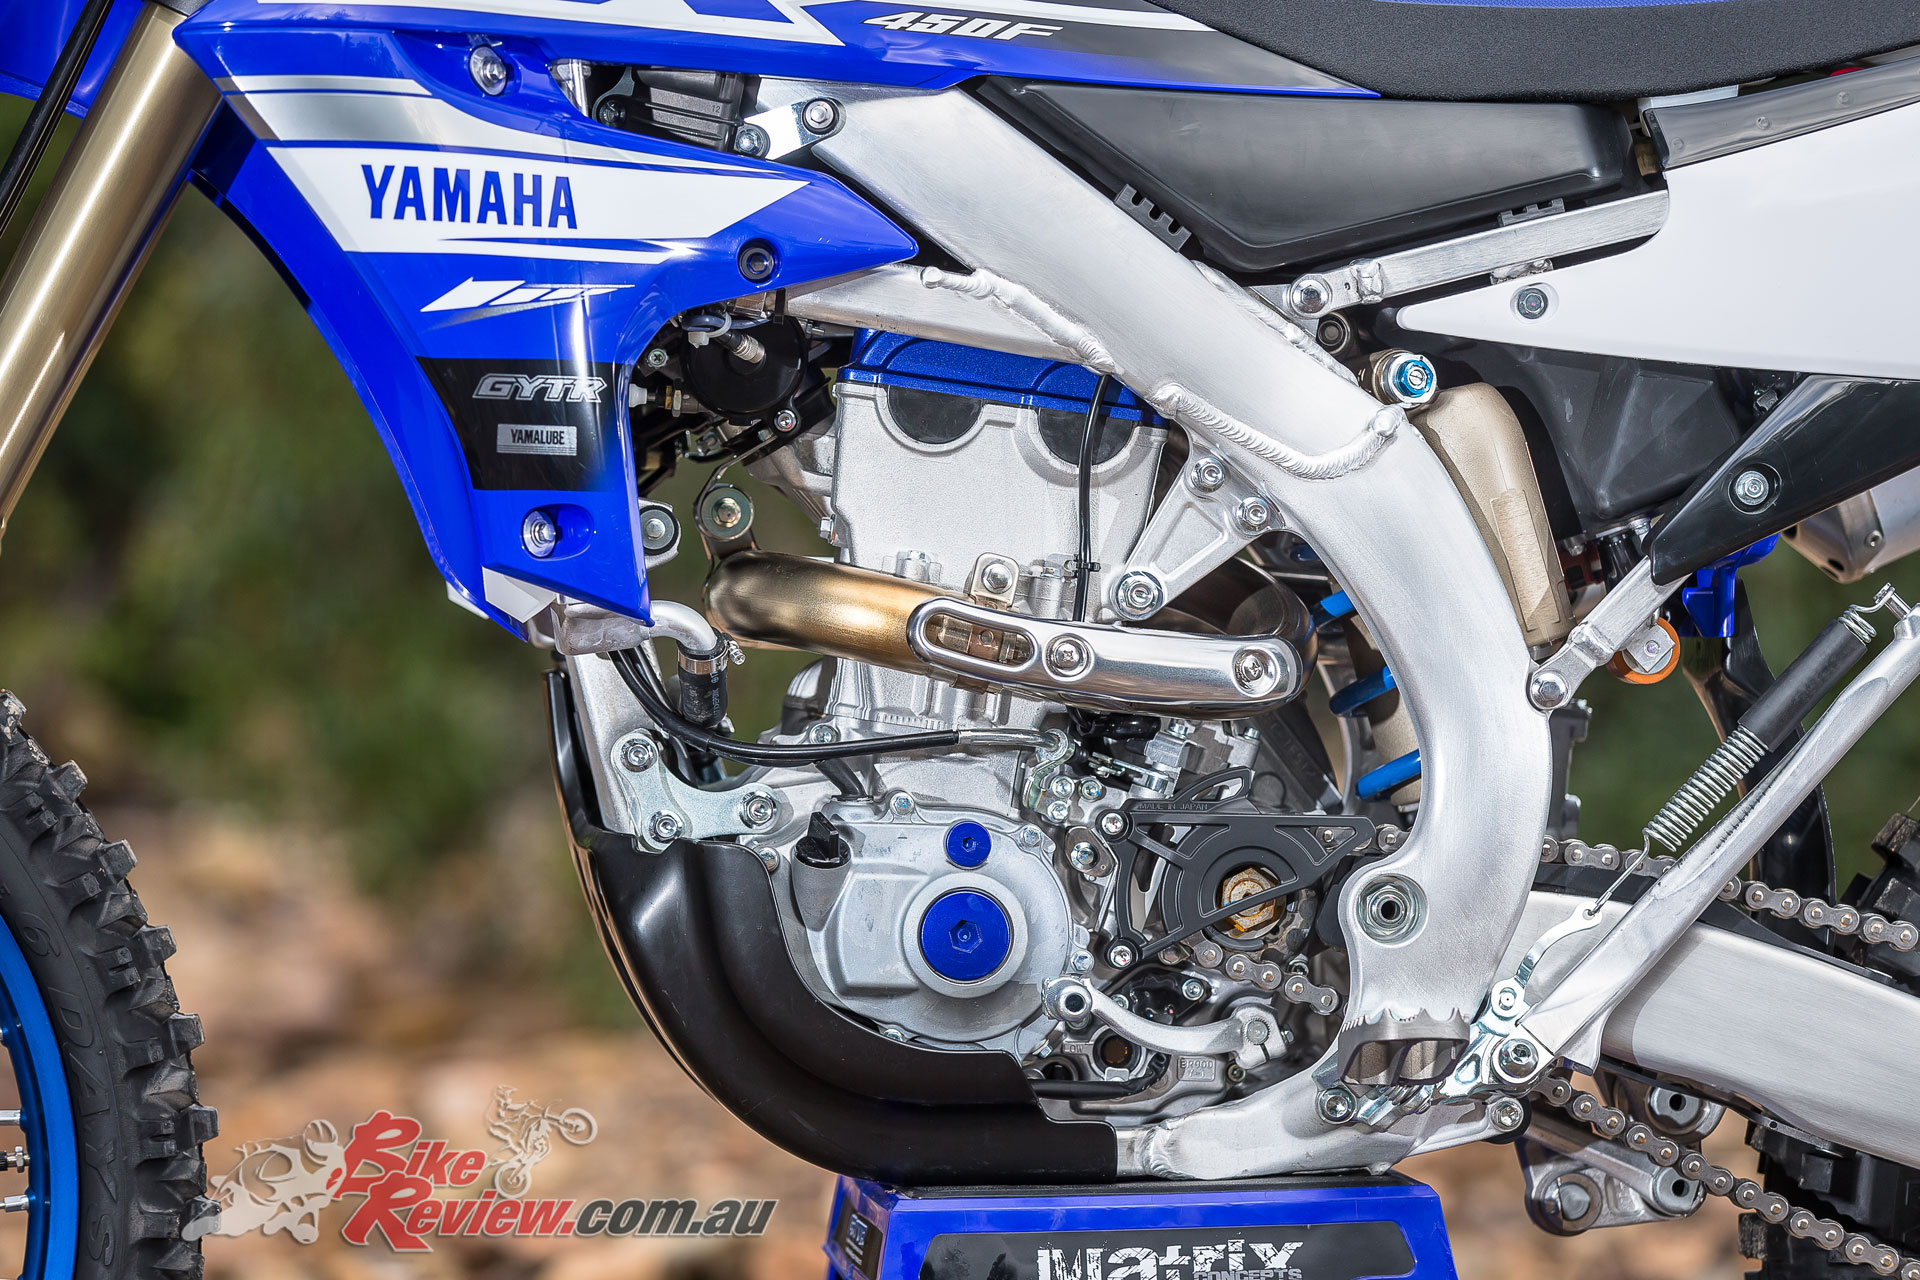 2019 Yamaha WR450F - The 2019 model features the YZ based reverse-cylinder head